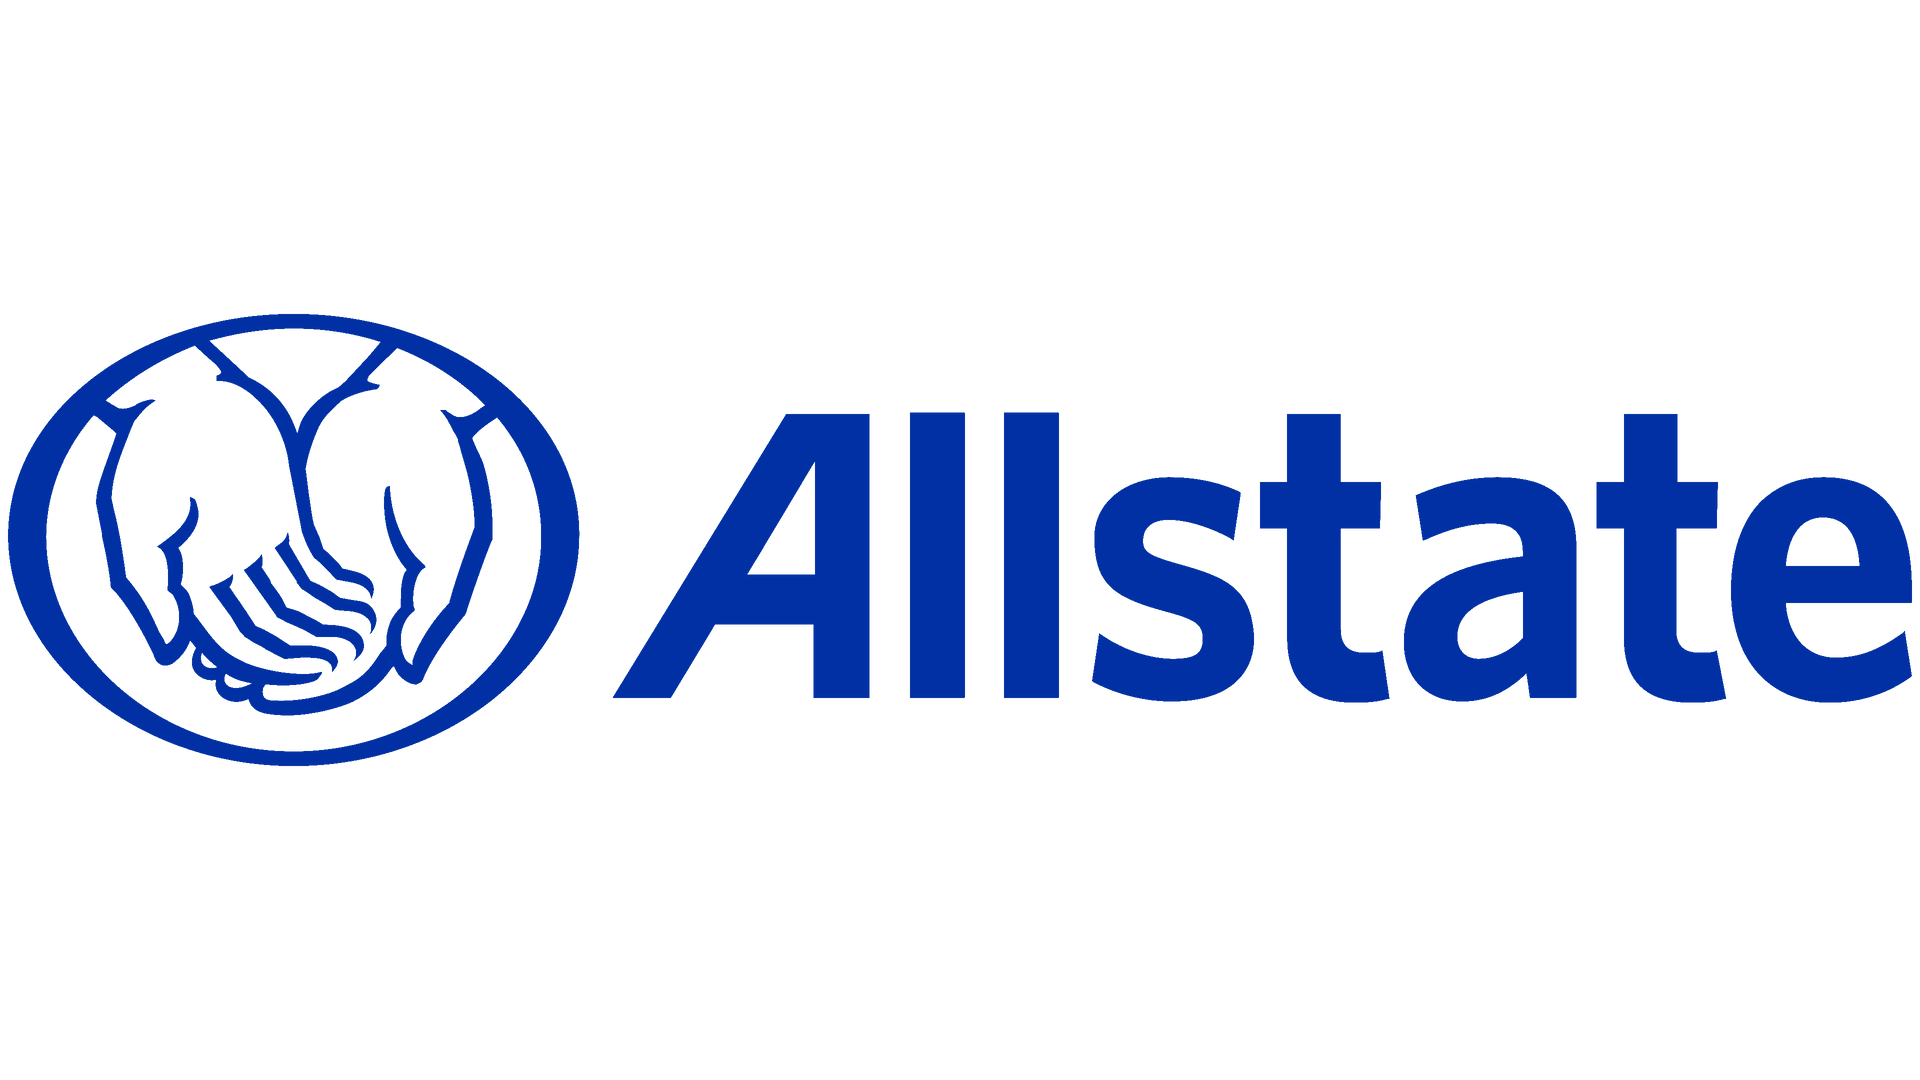 The allstate logo is blue and has two hands shaking each other.